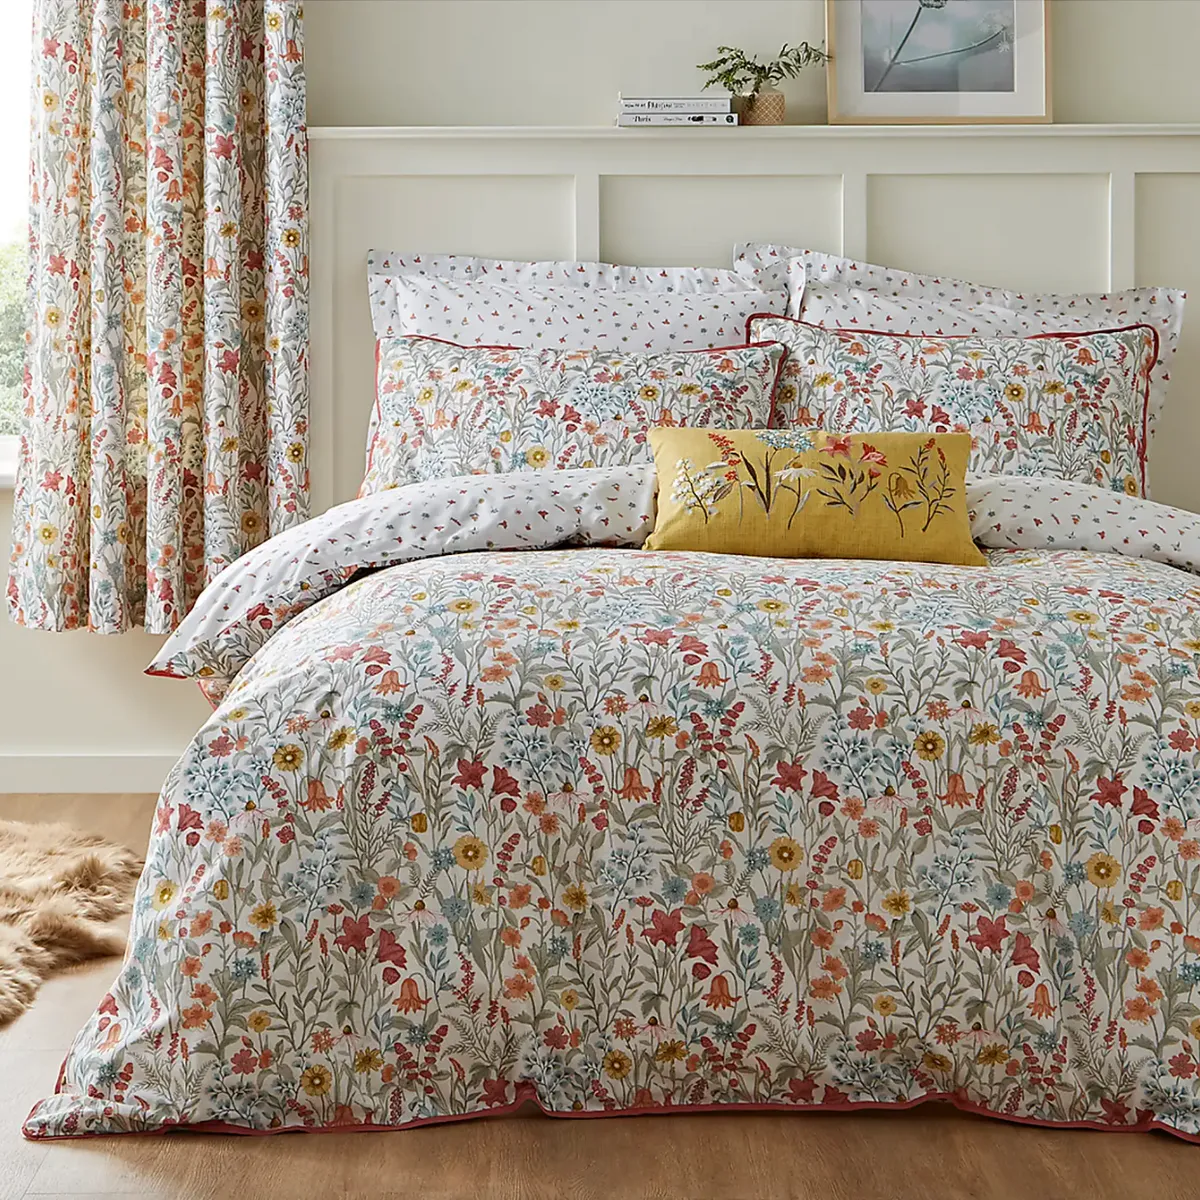 Meadow Ditsy Floral Red 100% Cotton Reversible Duvet Cover and Pillowcase Set, £30